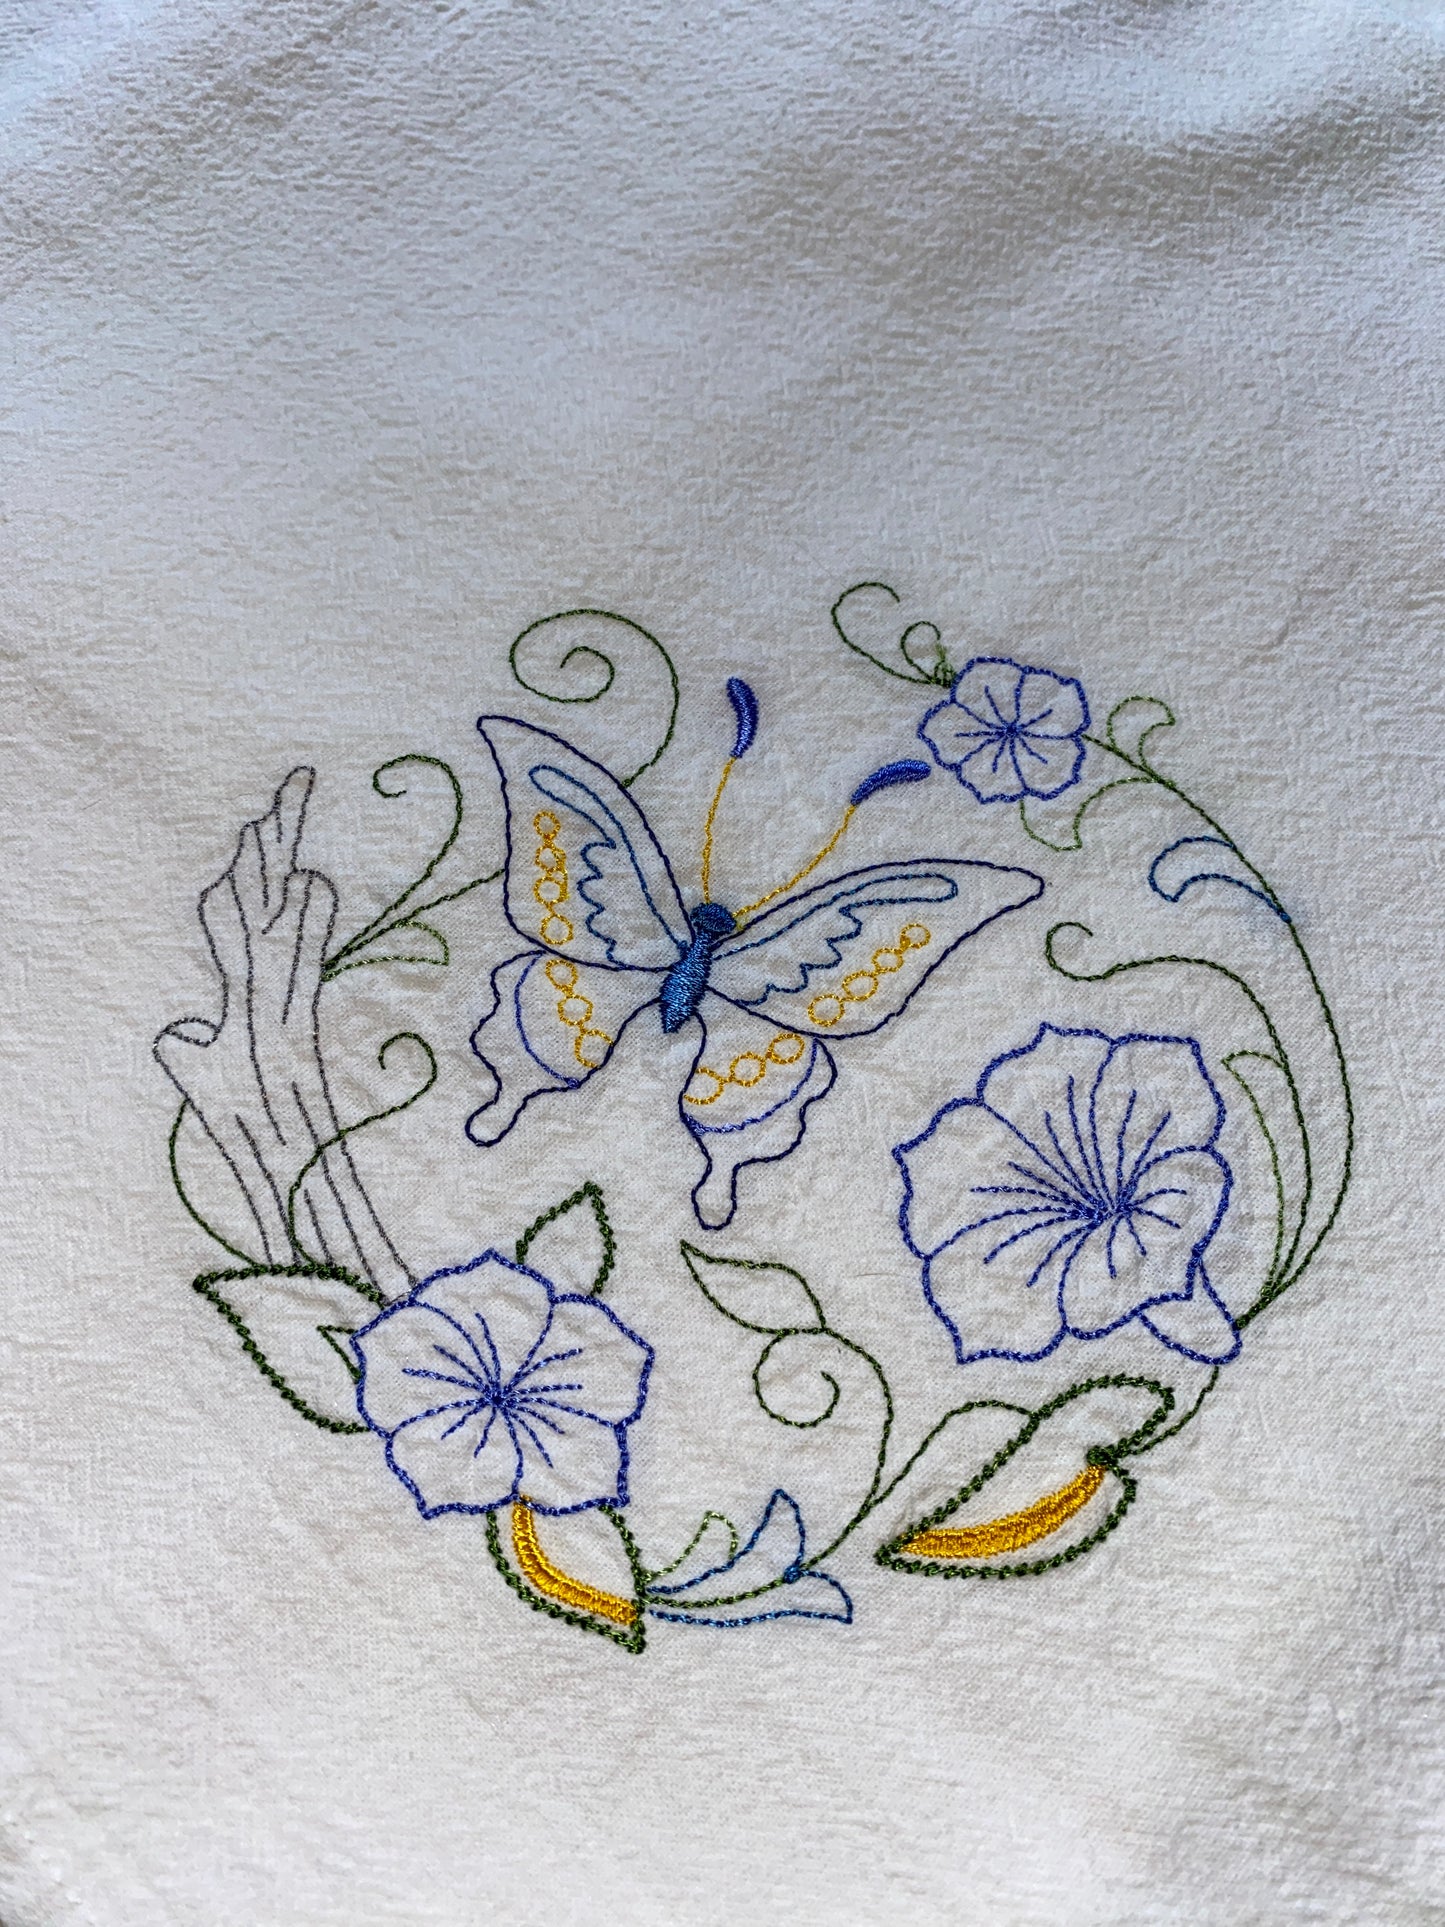 Butterfly Spring Theme Flour Sack Dish Towels